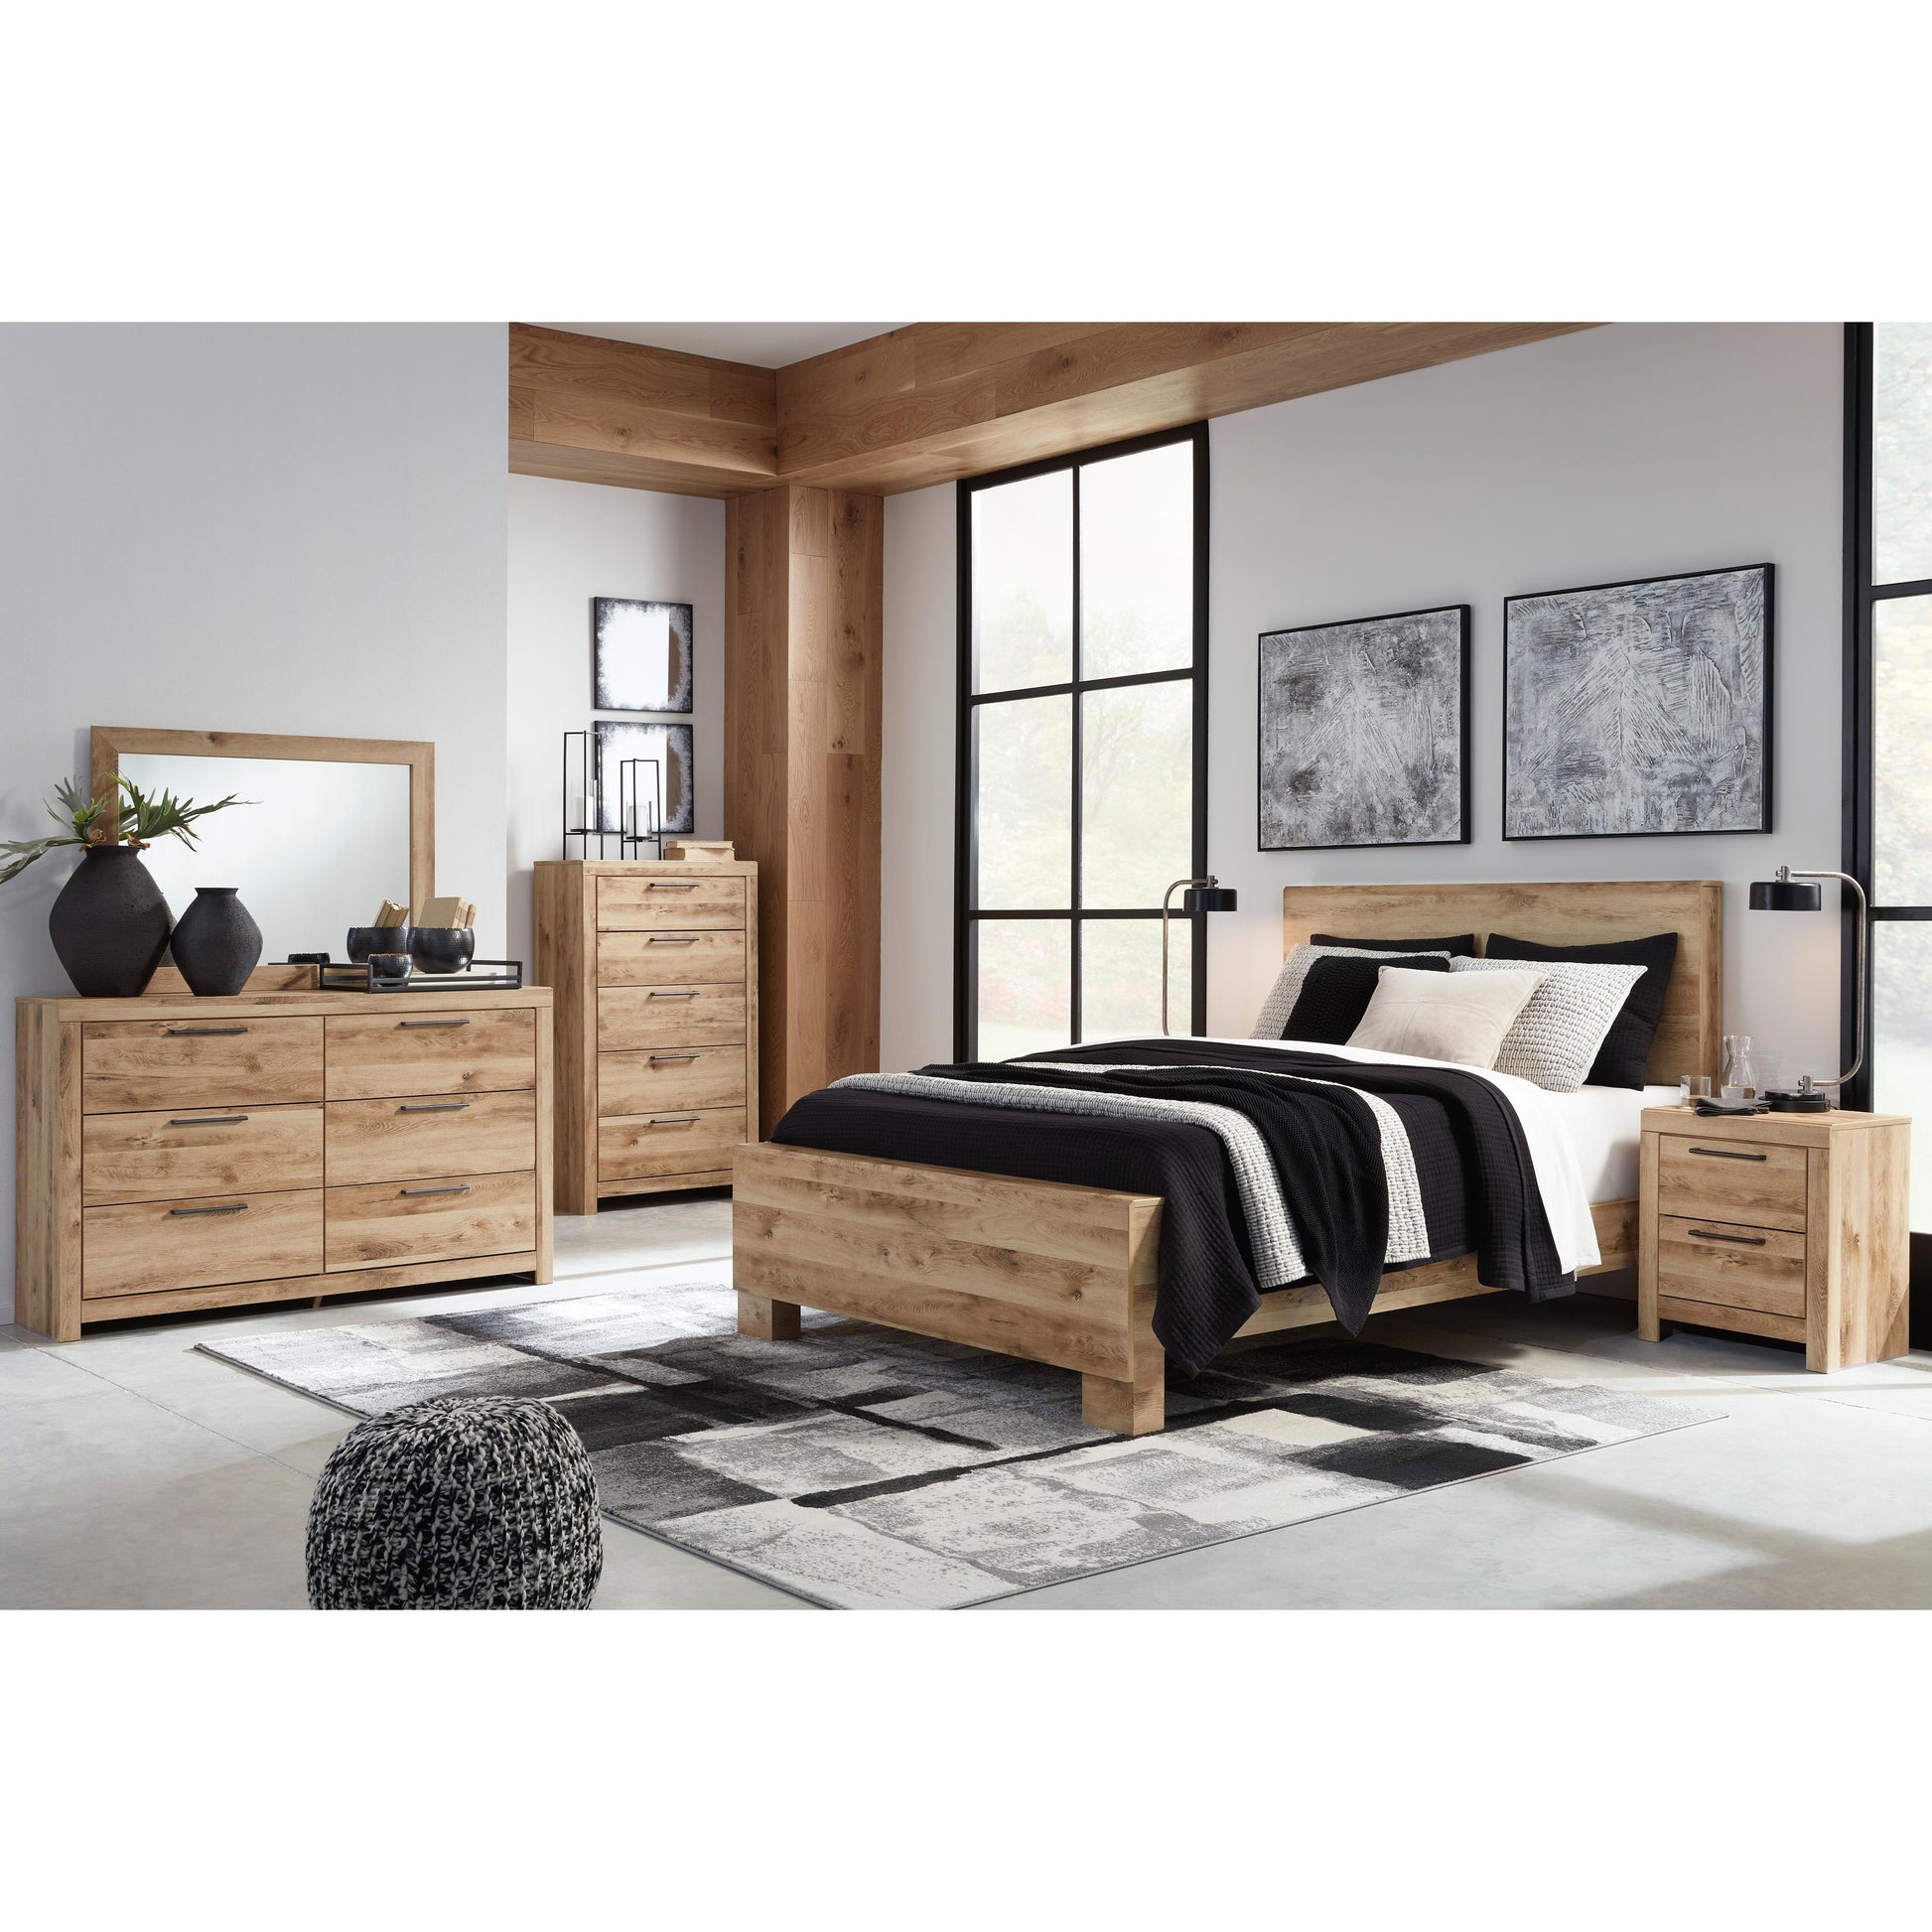 Signature Design by Ashley Hyanna B1050B35 6 pc Queen Panel Bedroom Set IMAGE 1